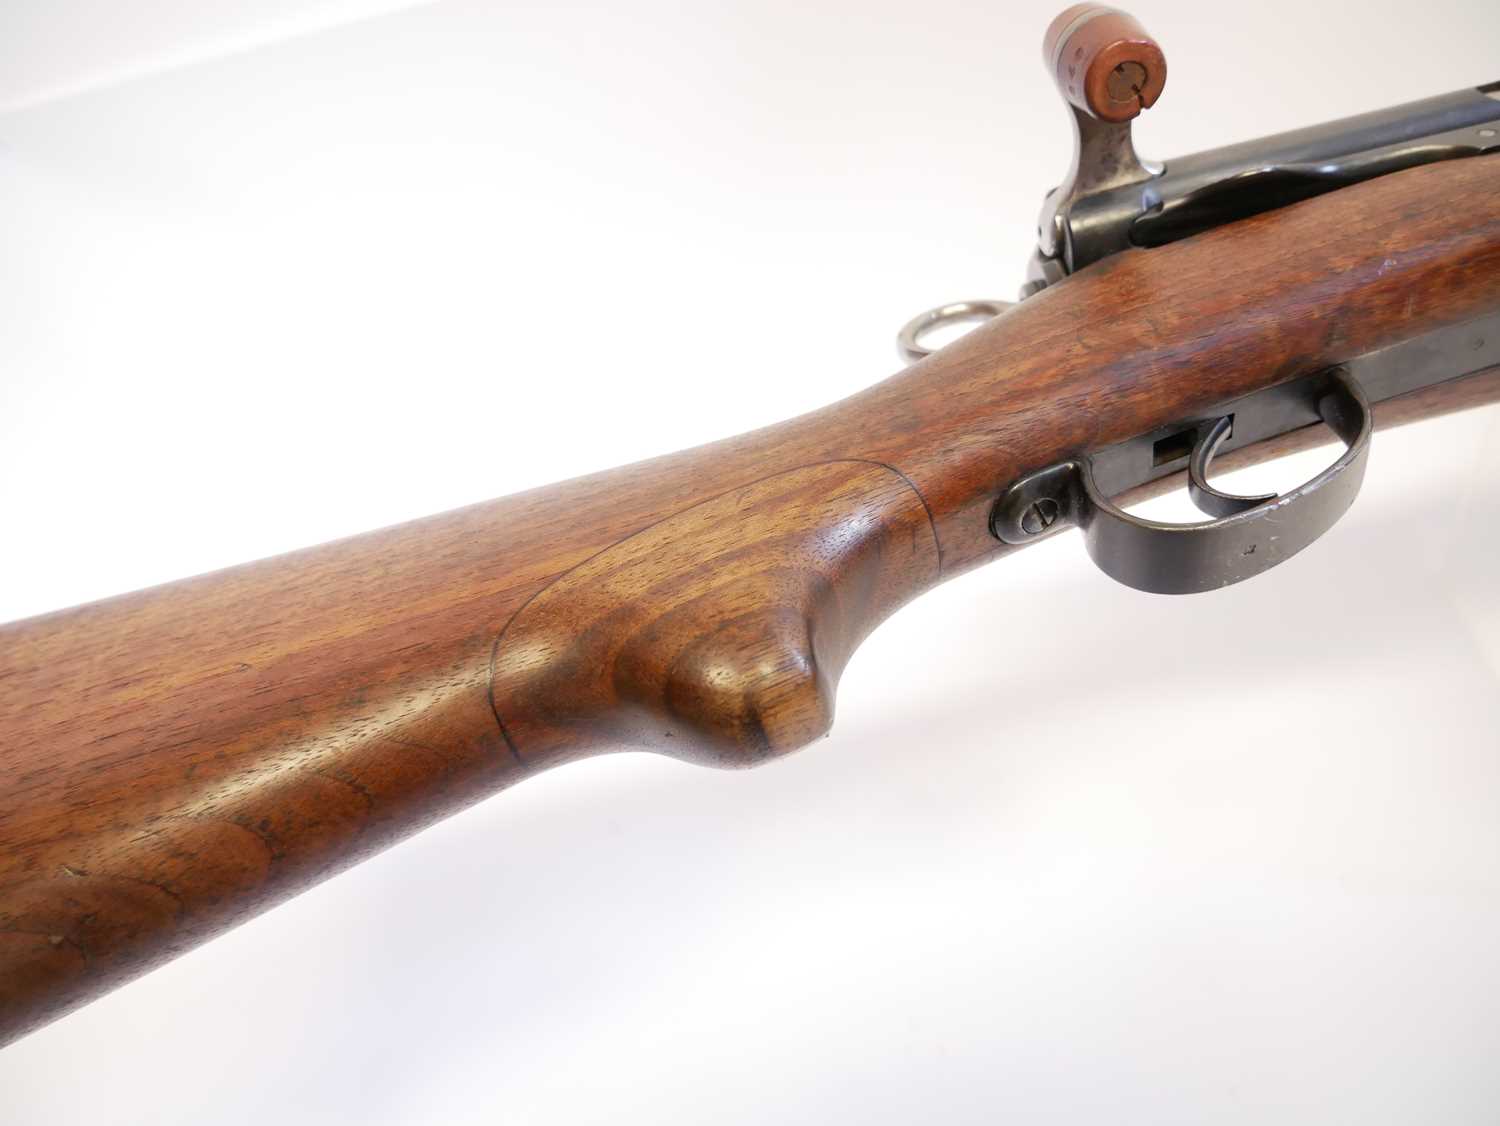 Schmidt Rubin 1896 7.5mm straight pull rifle, matching serial numbers 268510 to barrel, receiver, - Image 10 of 15